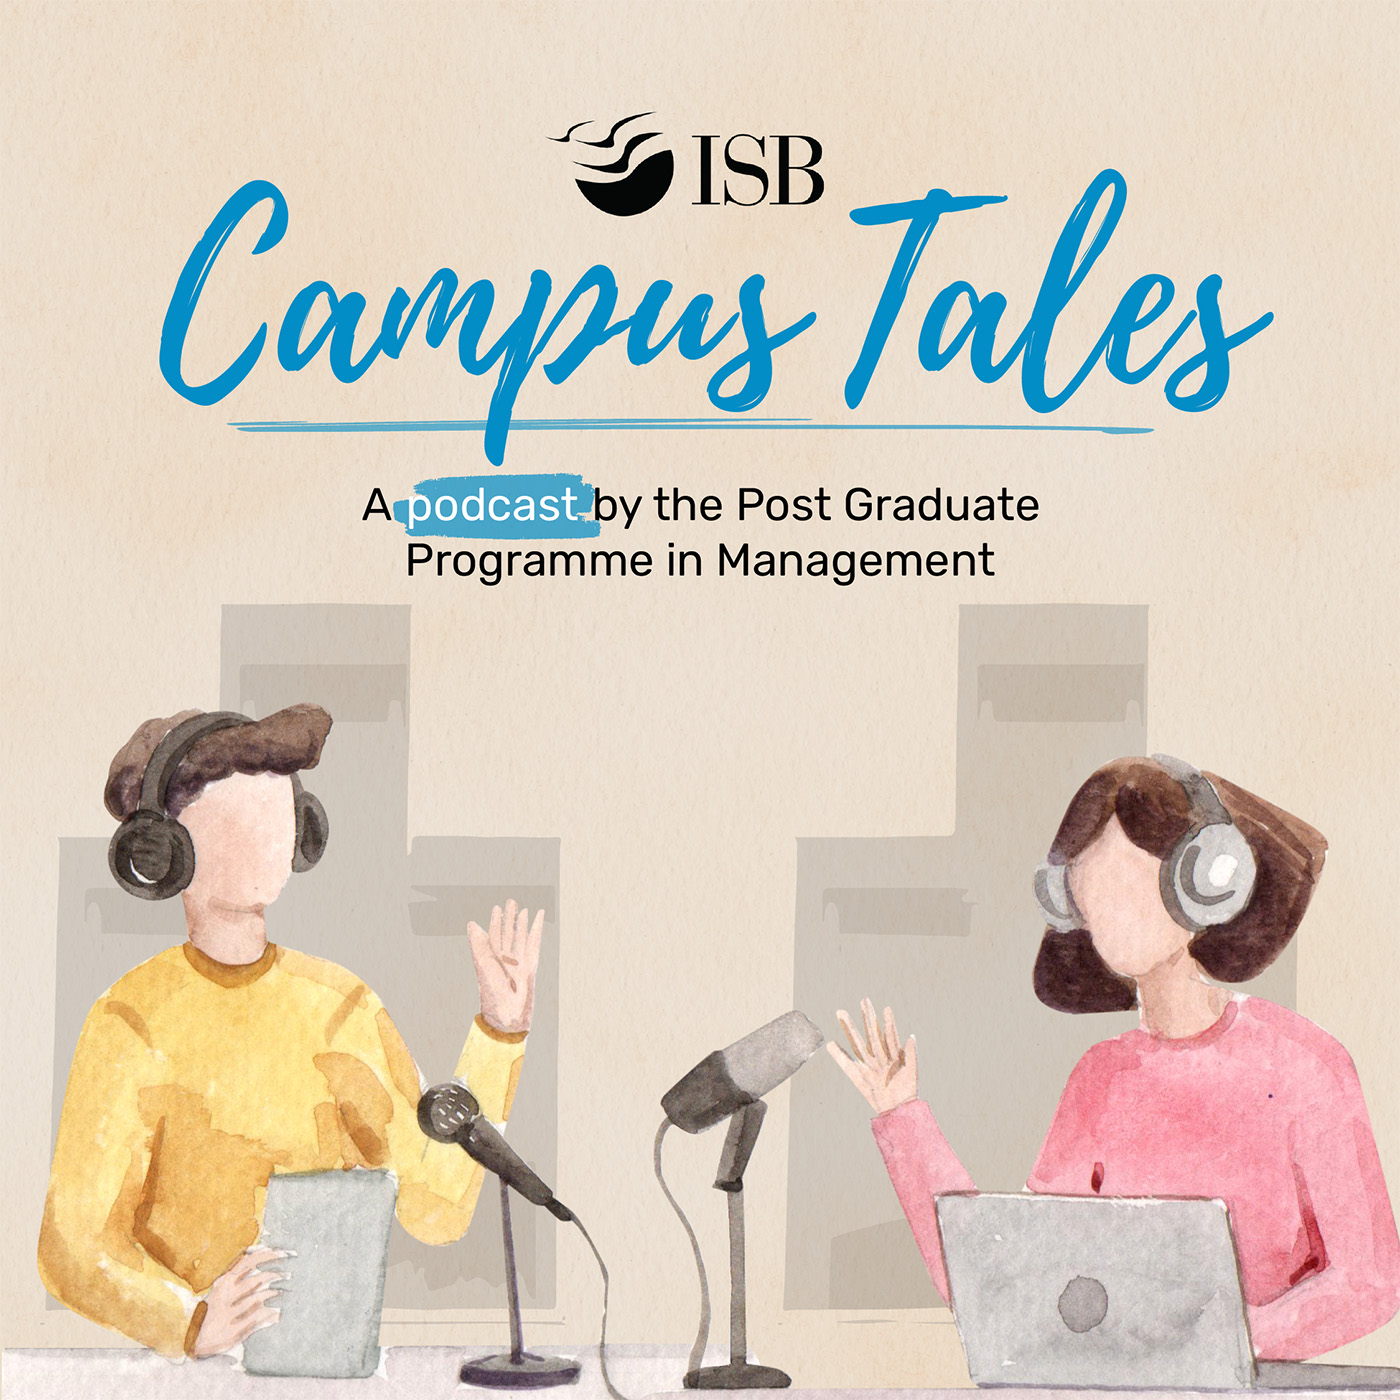 Artwork for Campus Tales by the Indian School of Business (ISB)